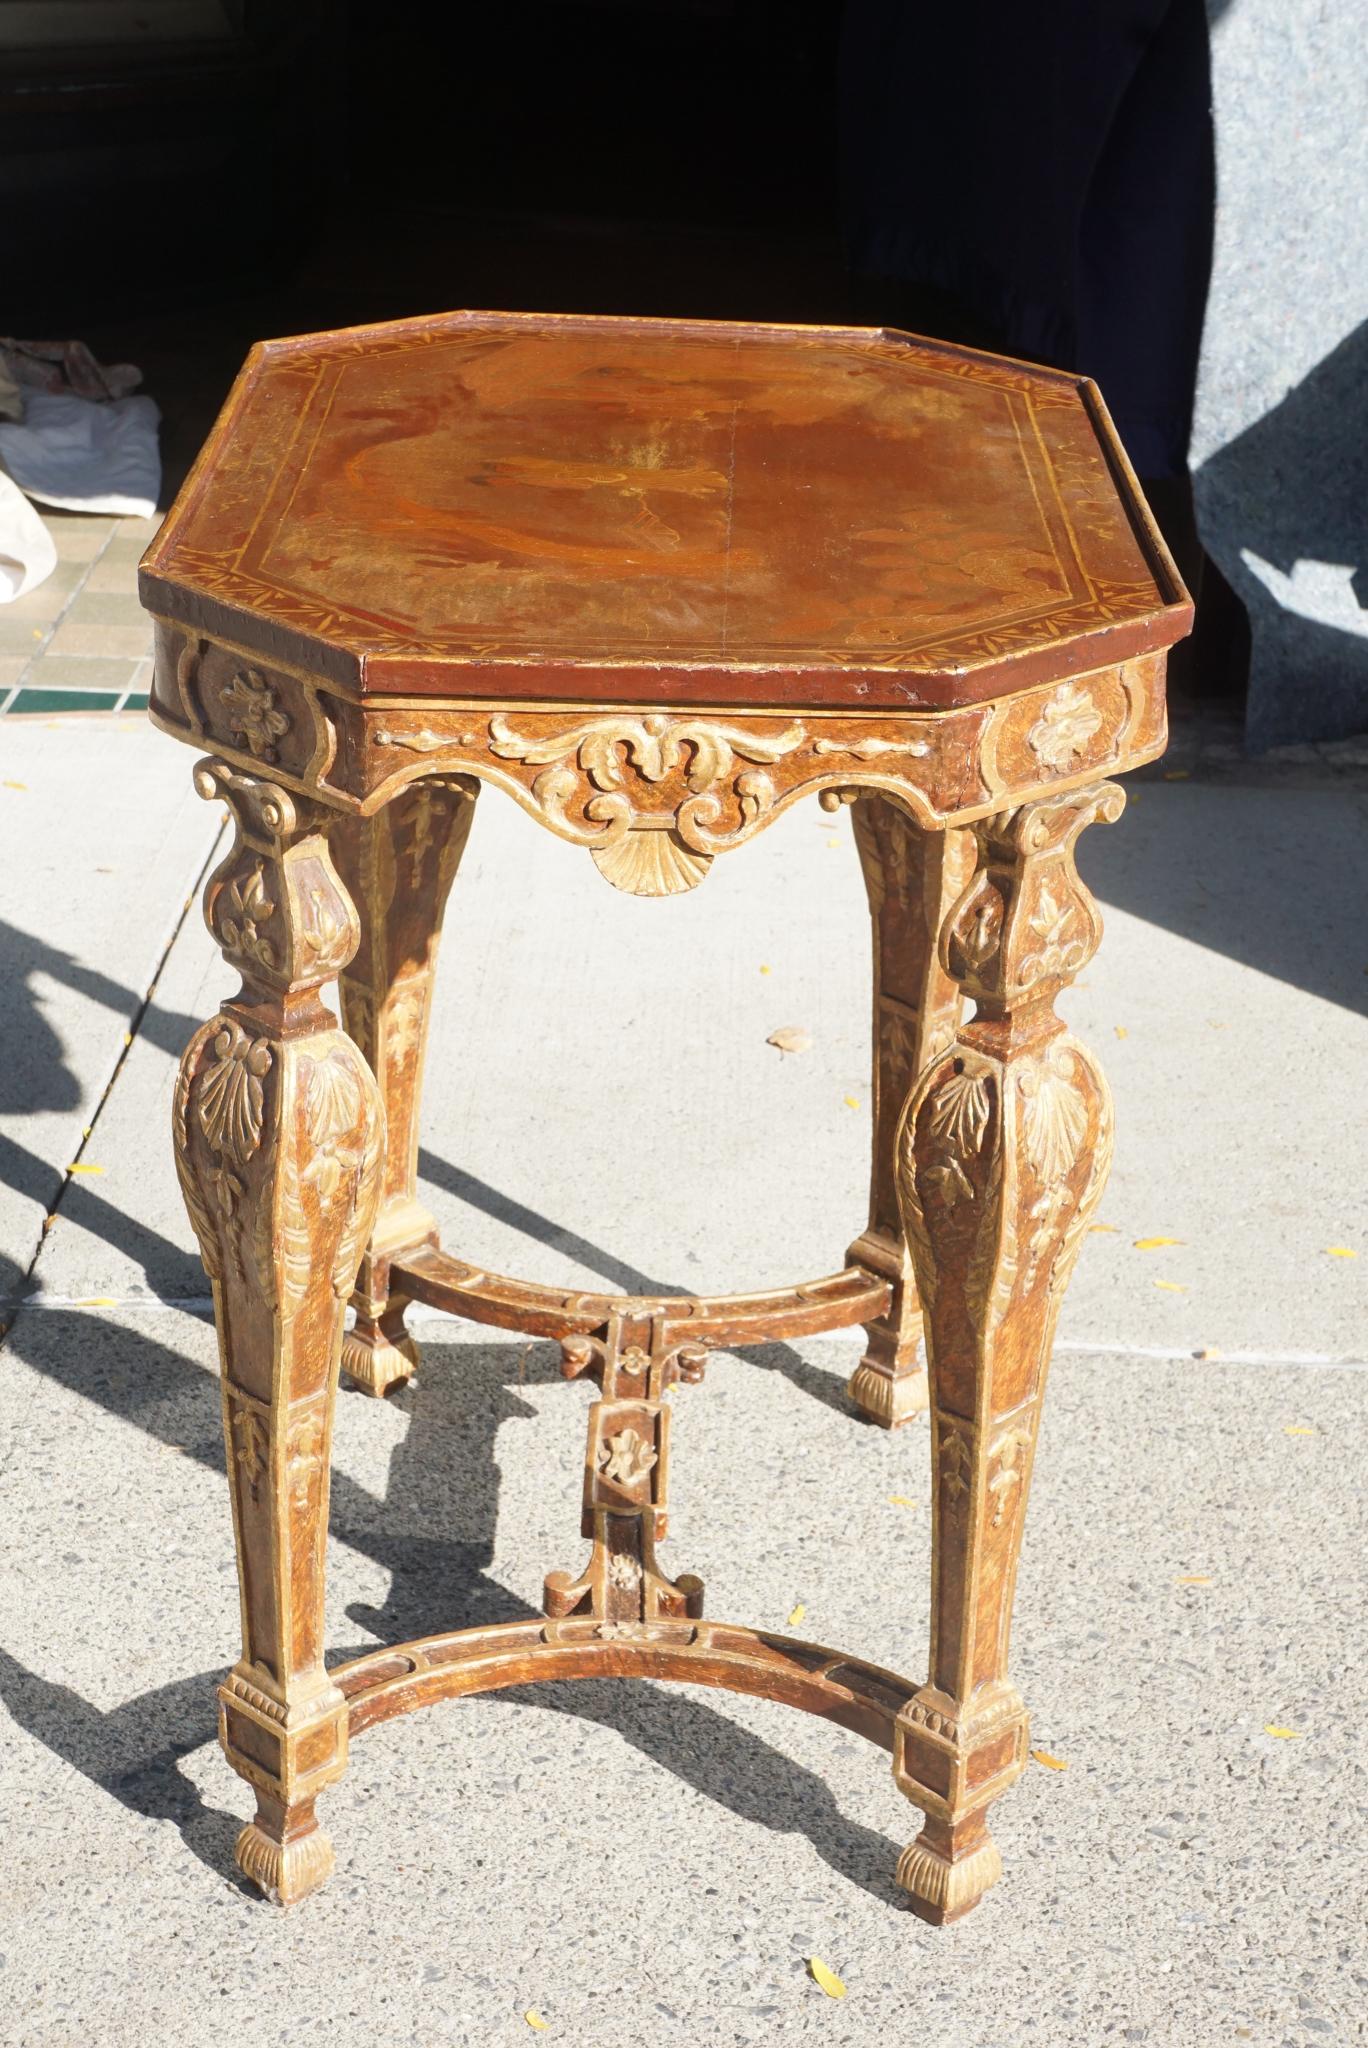 18th Century Period Baroque Painted and Gilt Italian Table From the Estate of Cynthia Phipps For Sale